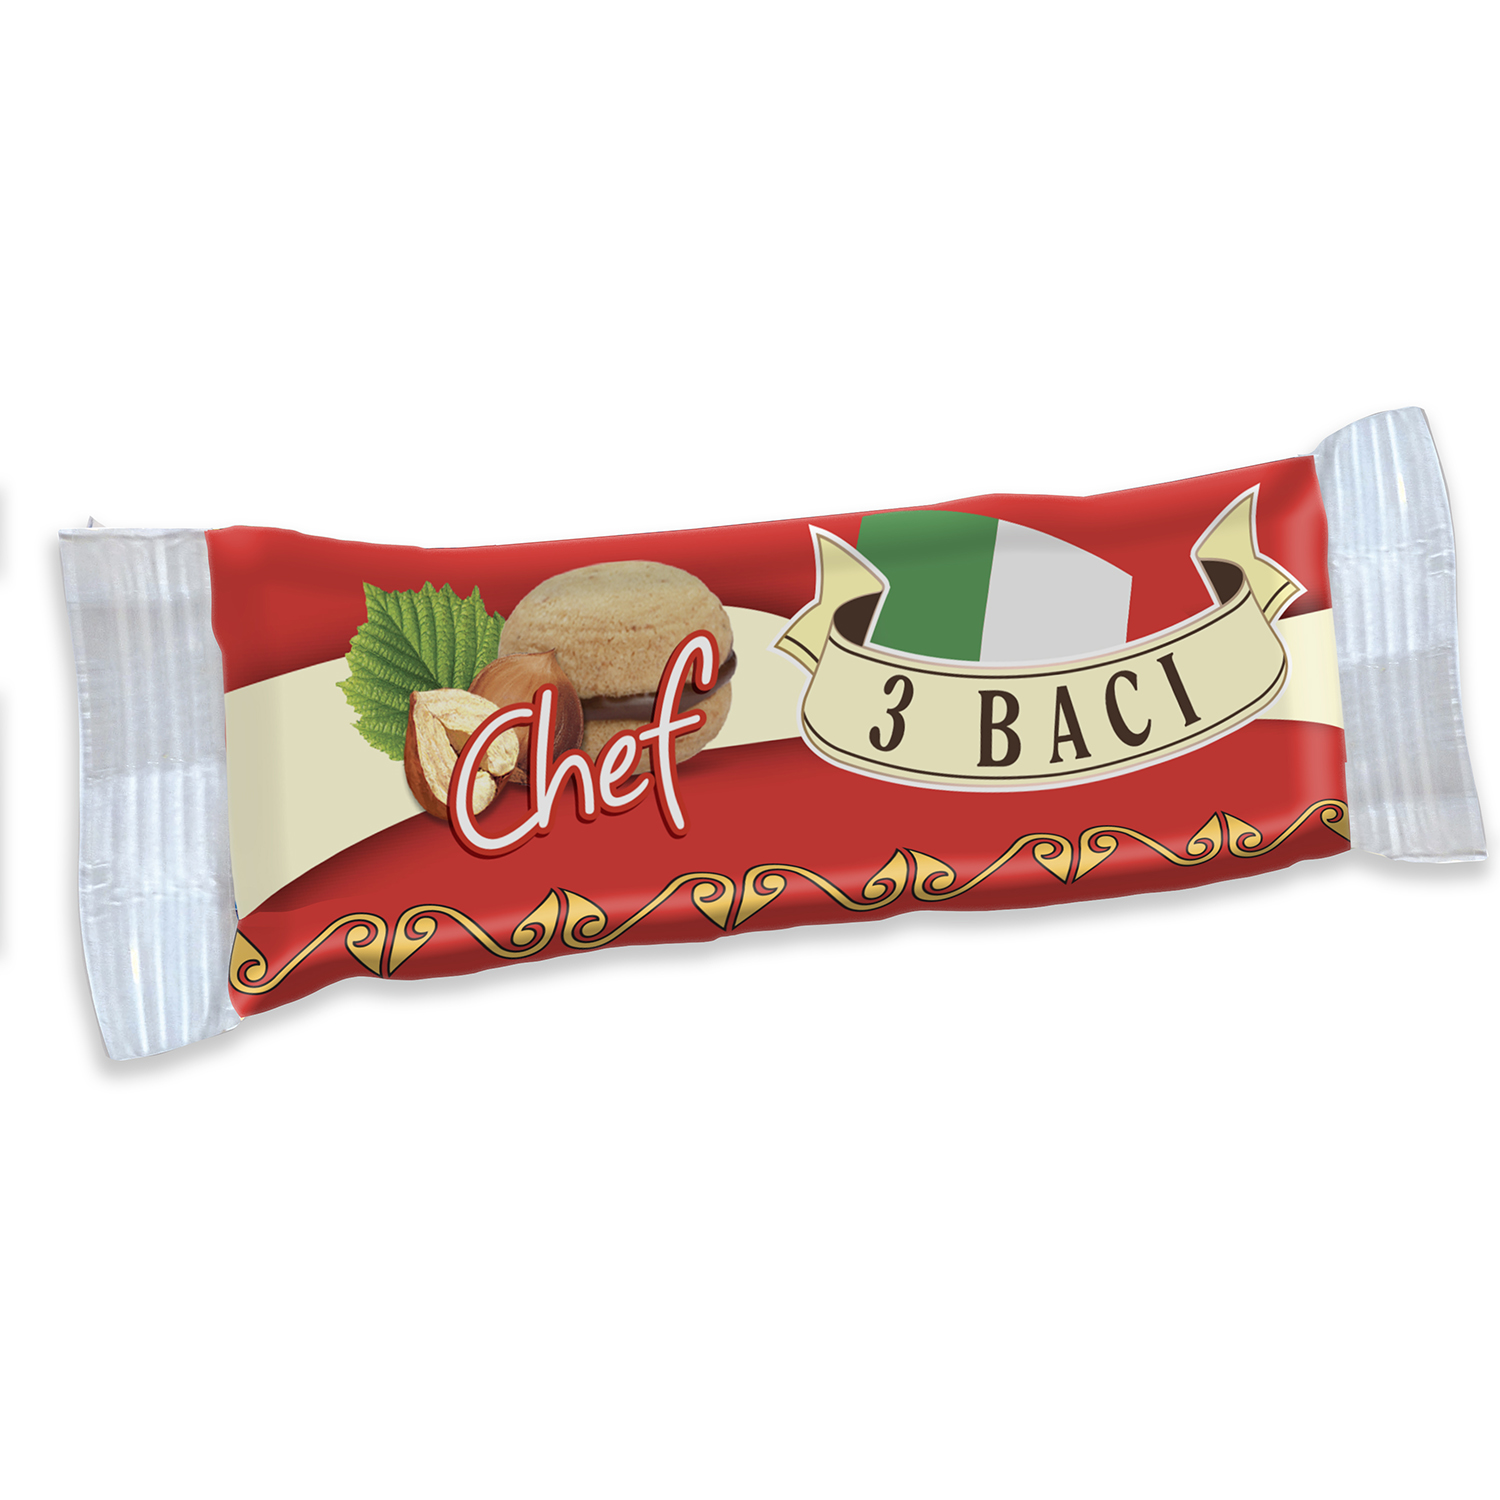 Baci di Dama（Kiss of Saronno） two round all butter pastry biscuits tasty snack/ dessert/Confectionary/ chocolate filling Bakery, Italy, Brand-Chef，Paolo Lazzaroni&Figli Spa